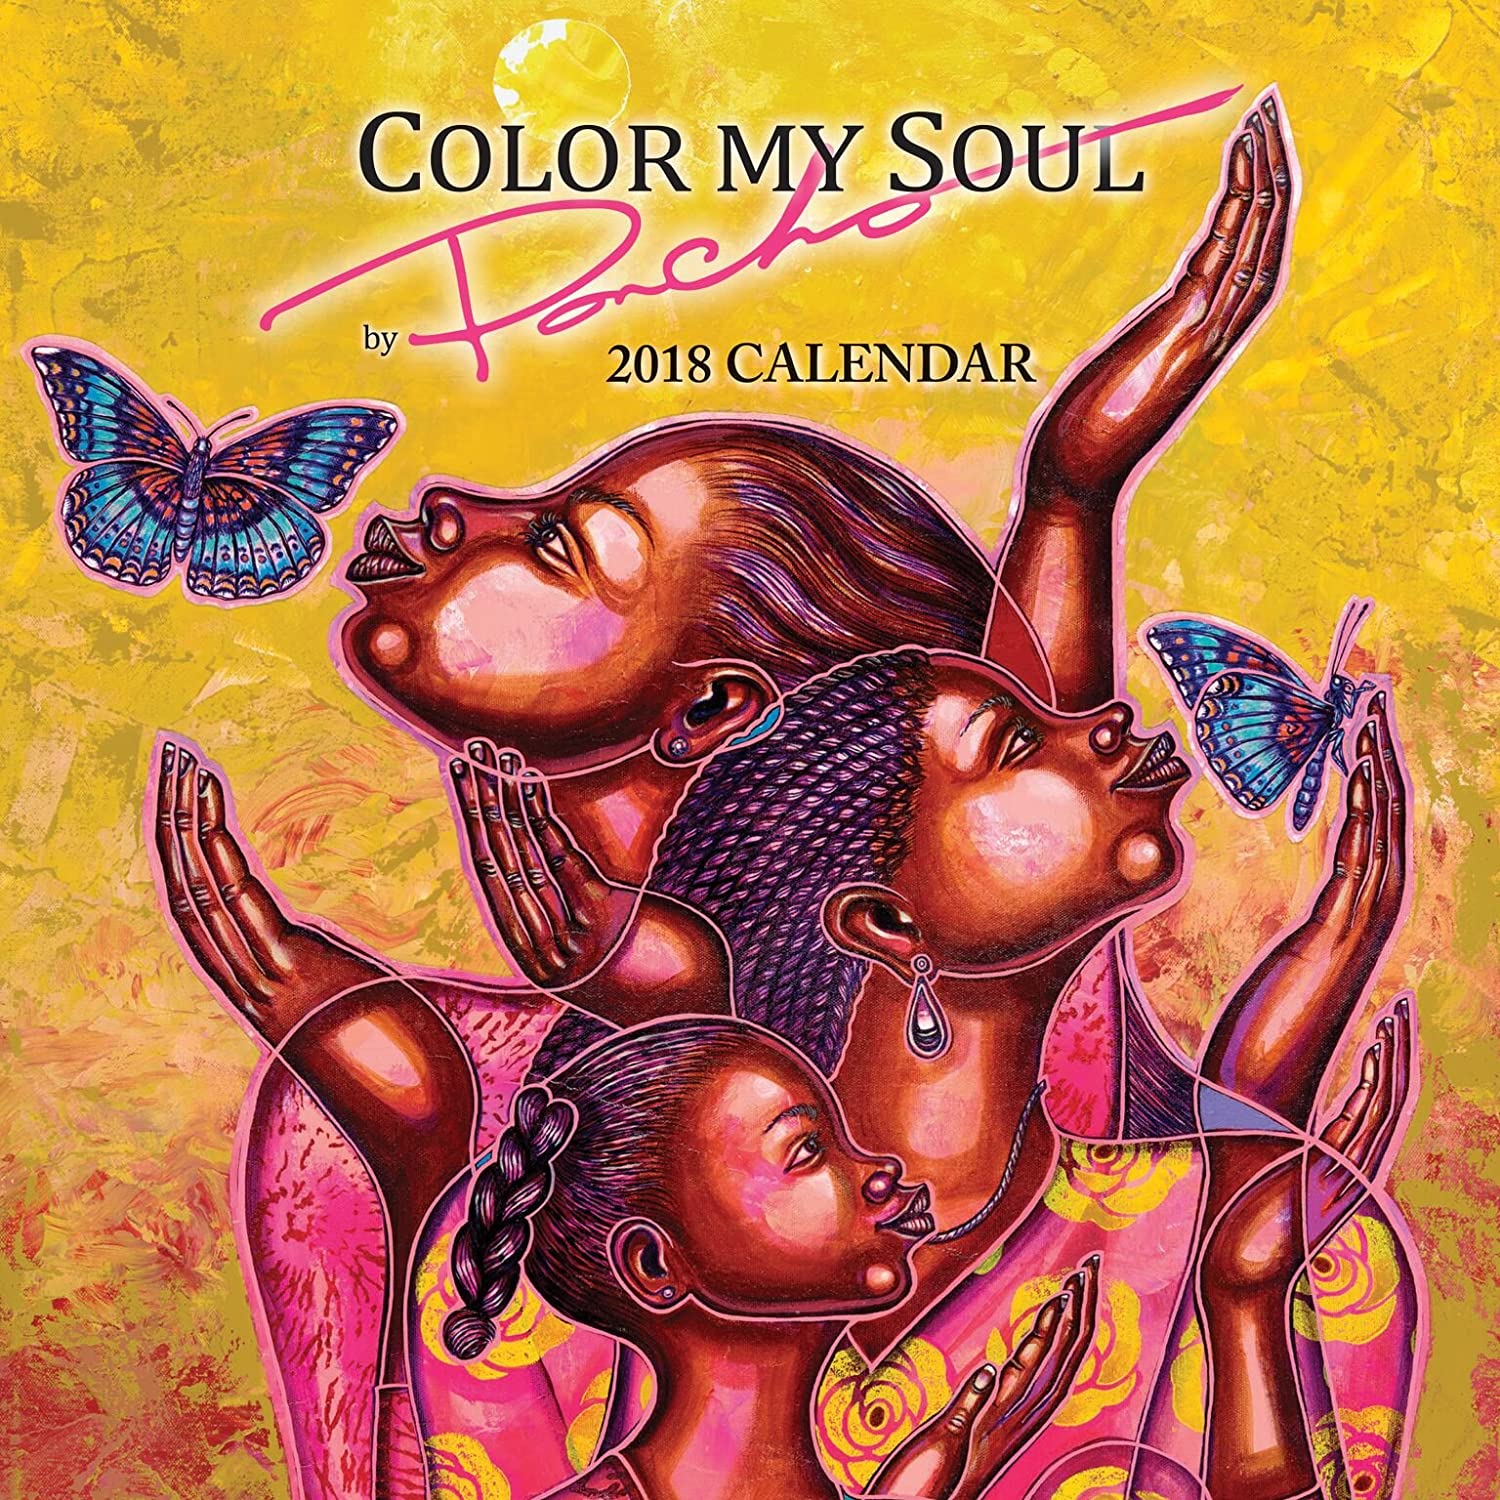  Color your soul in the strong hues of history, family, love, music and unity. The 2018 "Color My Soul" African American calendar by Larry "Poncho" Brown combines past and present to create a sense of realism, mysticism, and beauty. Admirers of his work often site rhythm, movement, and unity, as favorite elements in his art. His work adorns the walls of the likes of Dick Gregory, Anita Baker, and Susan Taylor just to name a few. Features monthly religious scripture.2018 Color My Soul Calendar - NEW -